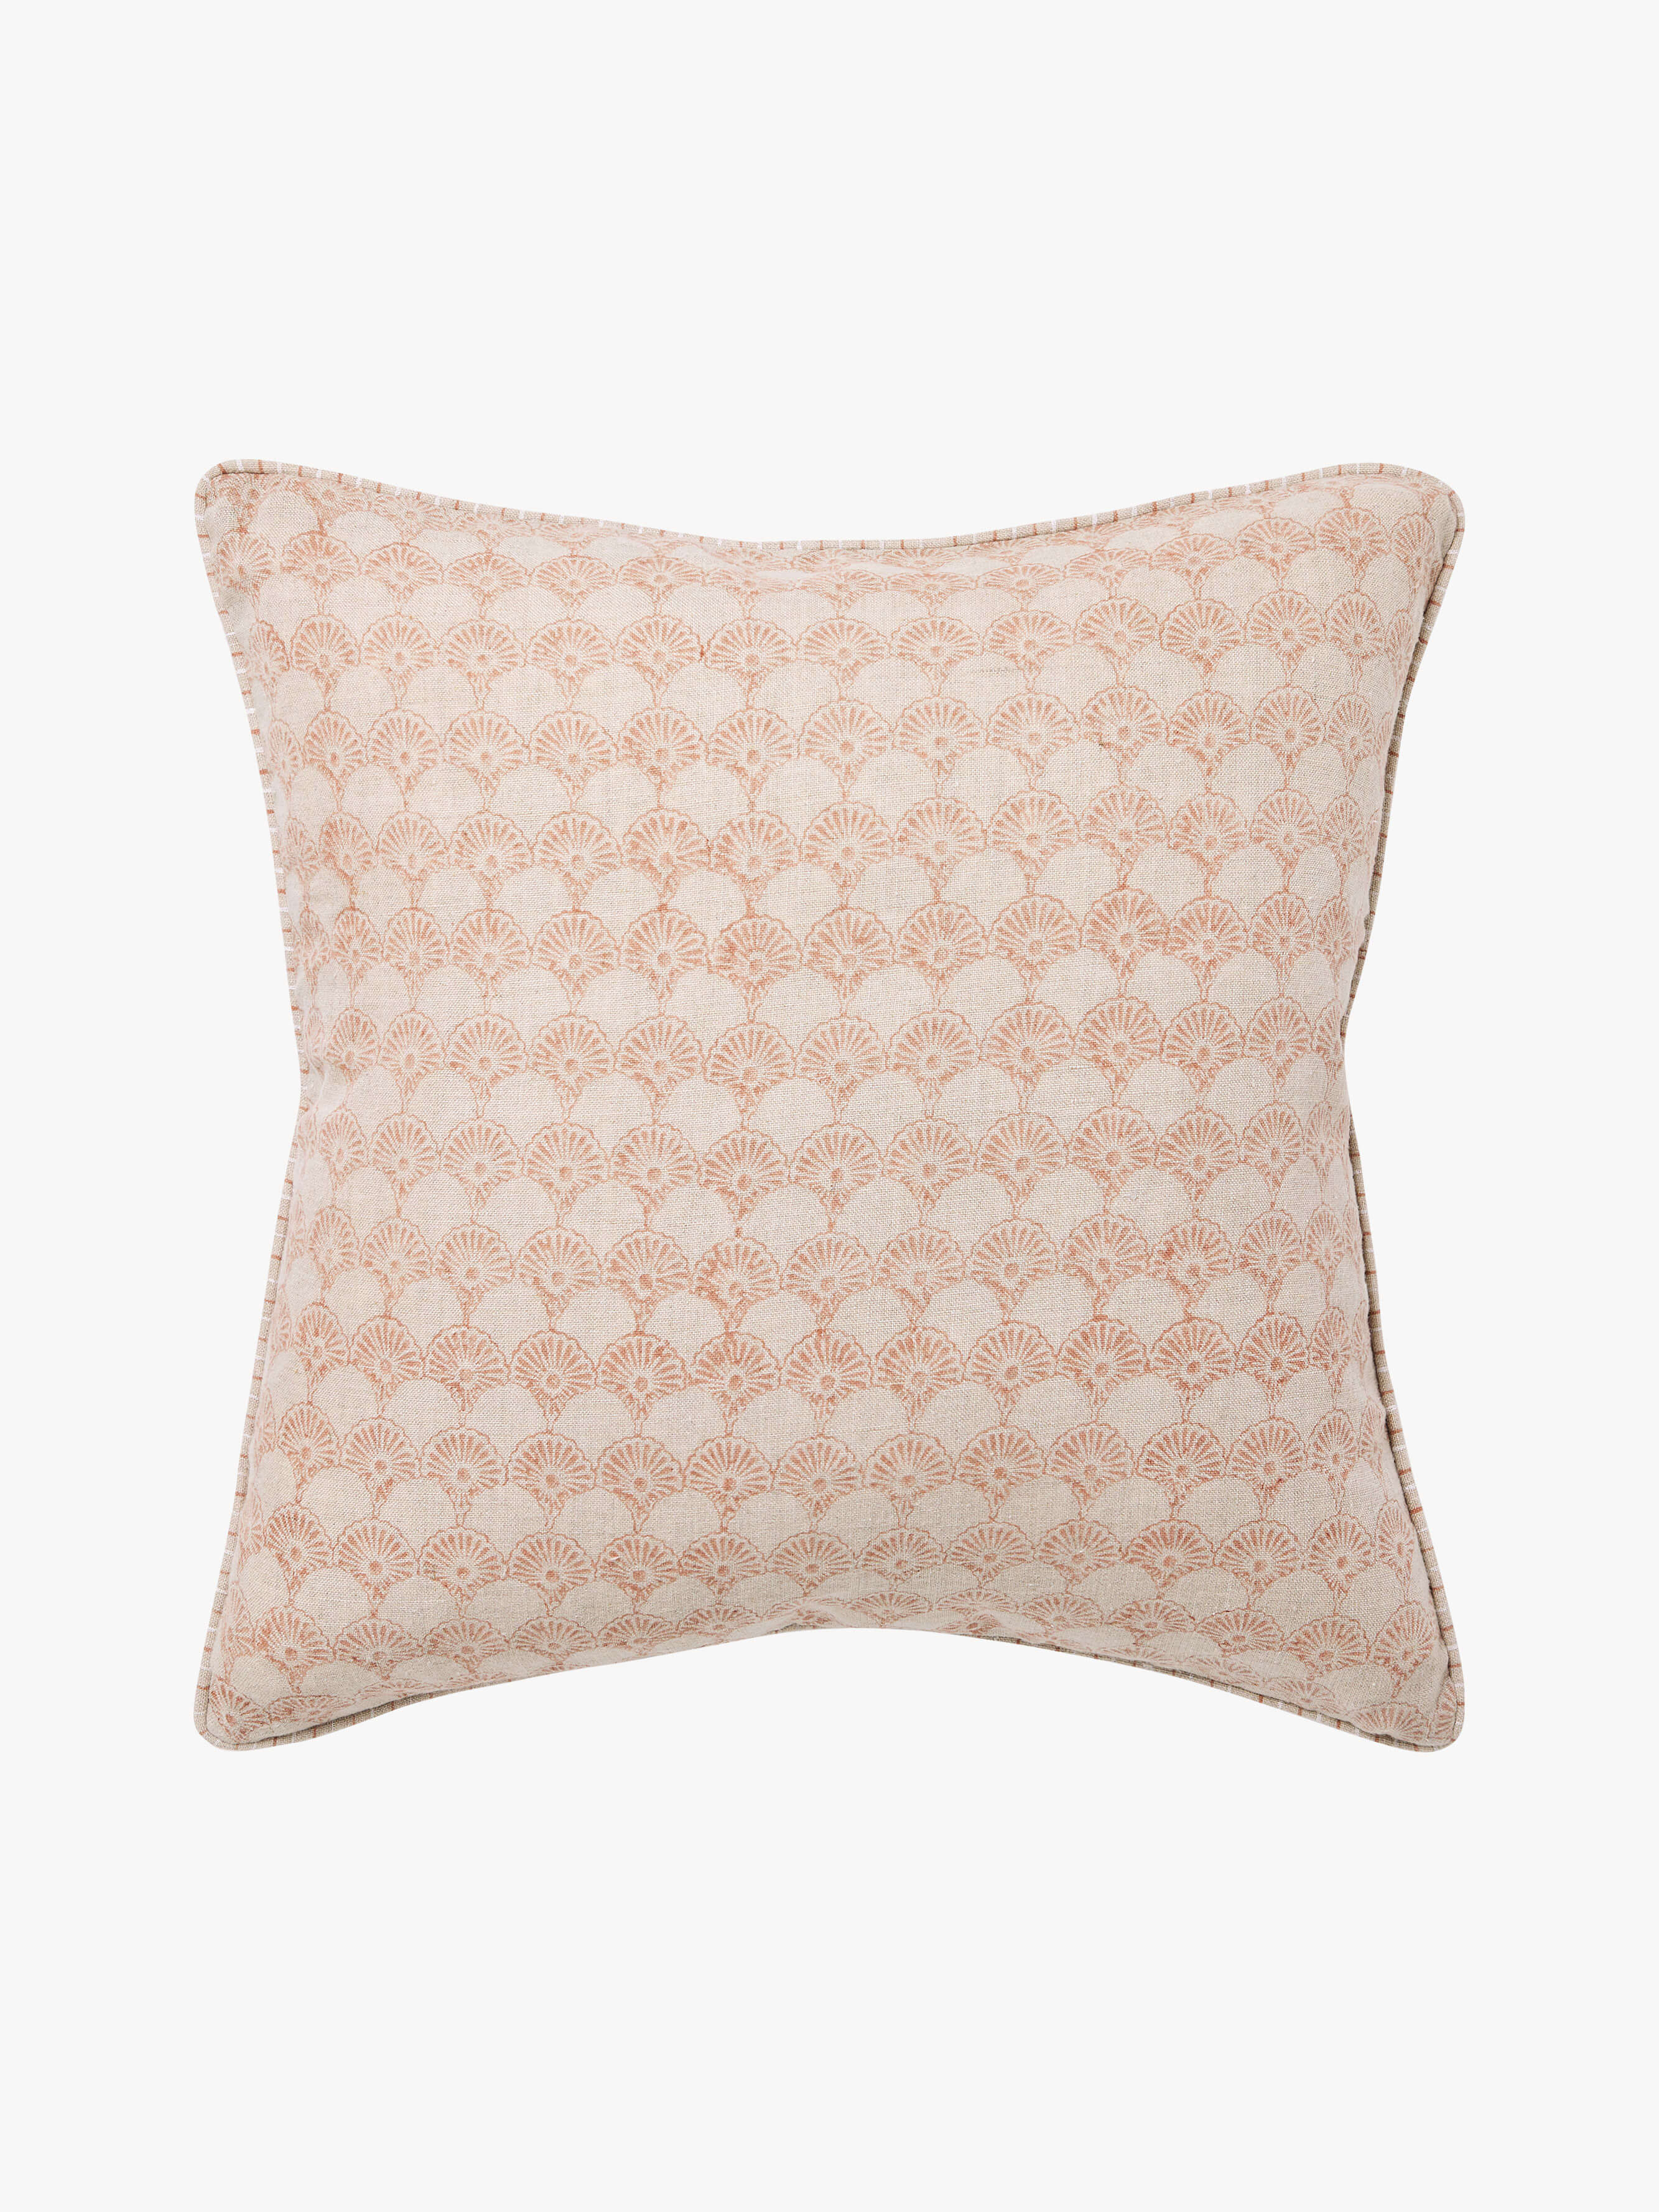 Cove Baked Clay Reversible Linen Cushion